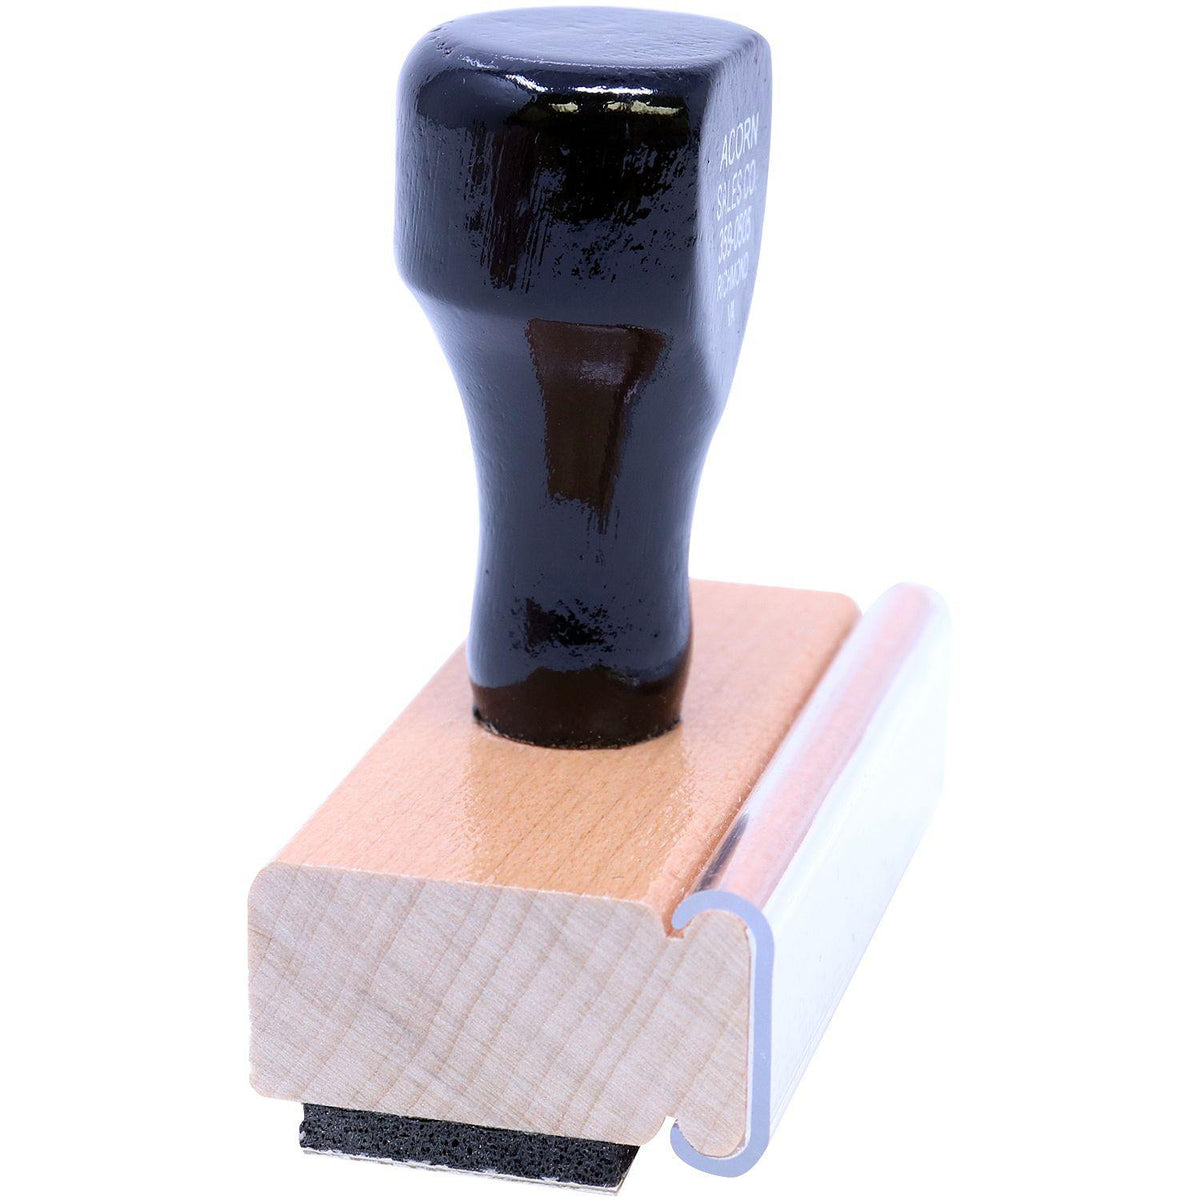 Side View of Large School Property Rubber Stamp at an Angle